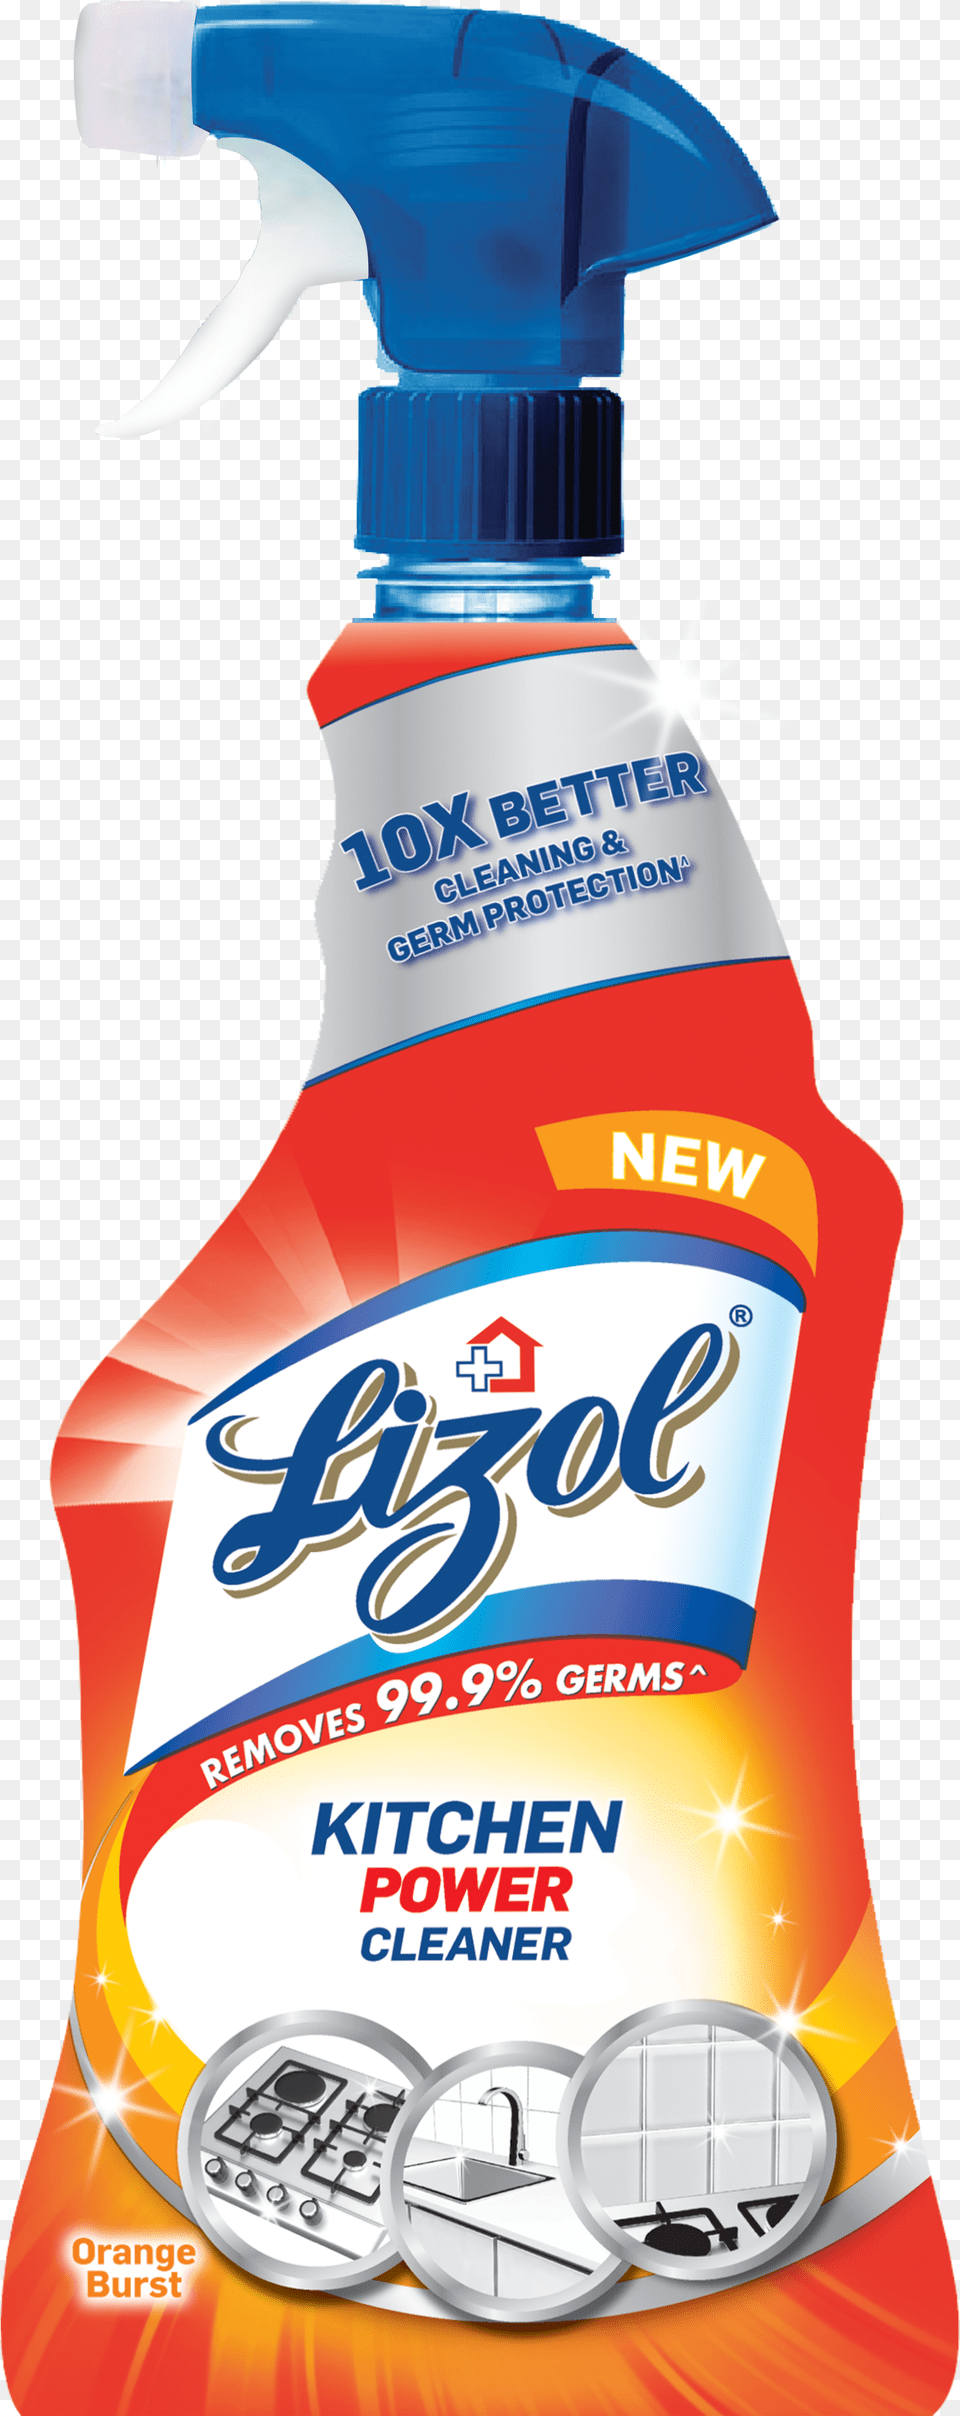 Lizol Lizol Kitchen Power Cleaner, Food, Ketchup, Bottle, Cleaning Free Transparent Png